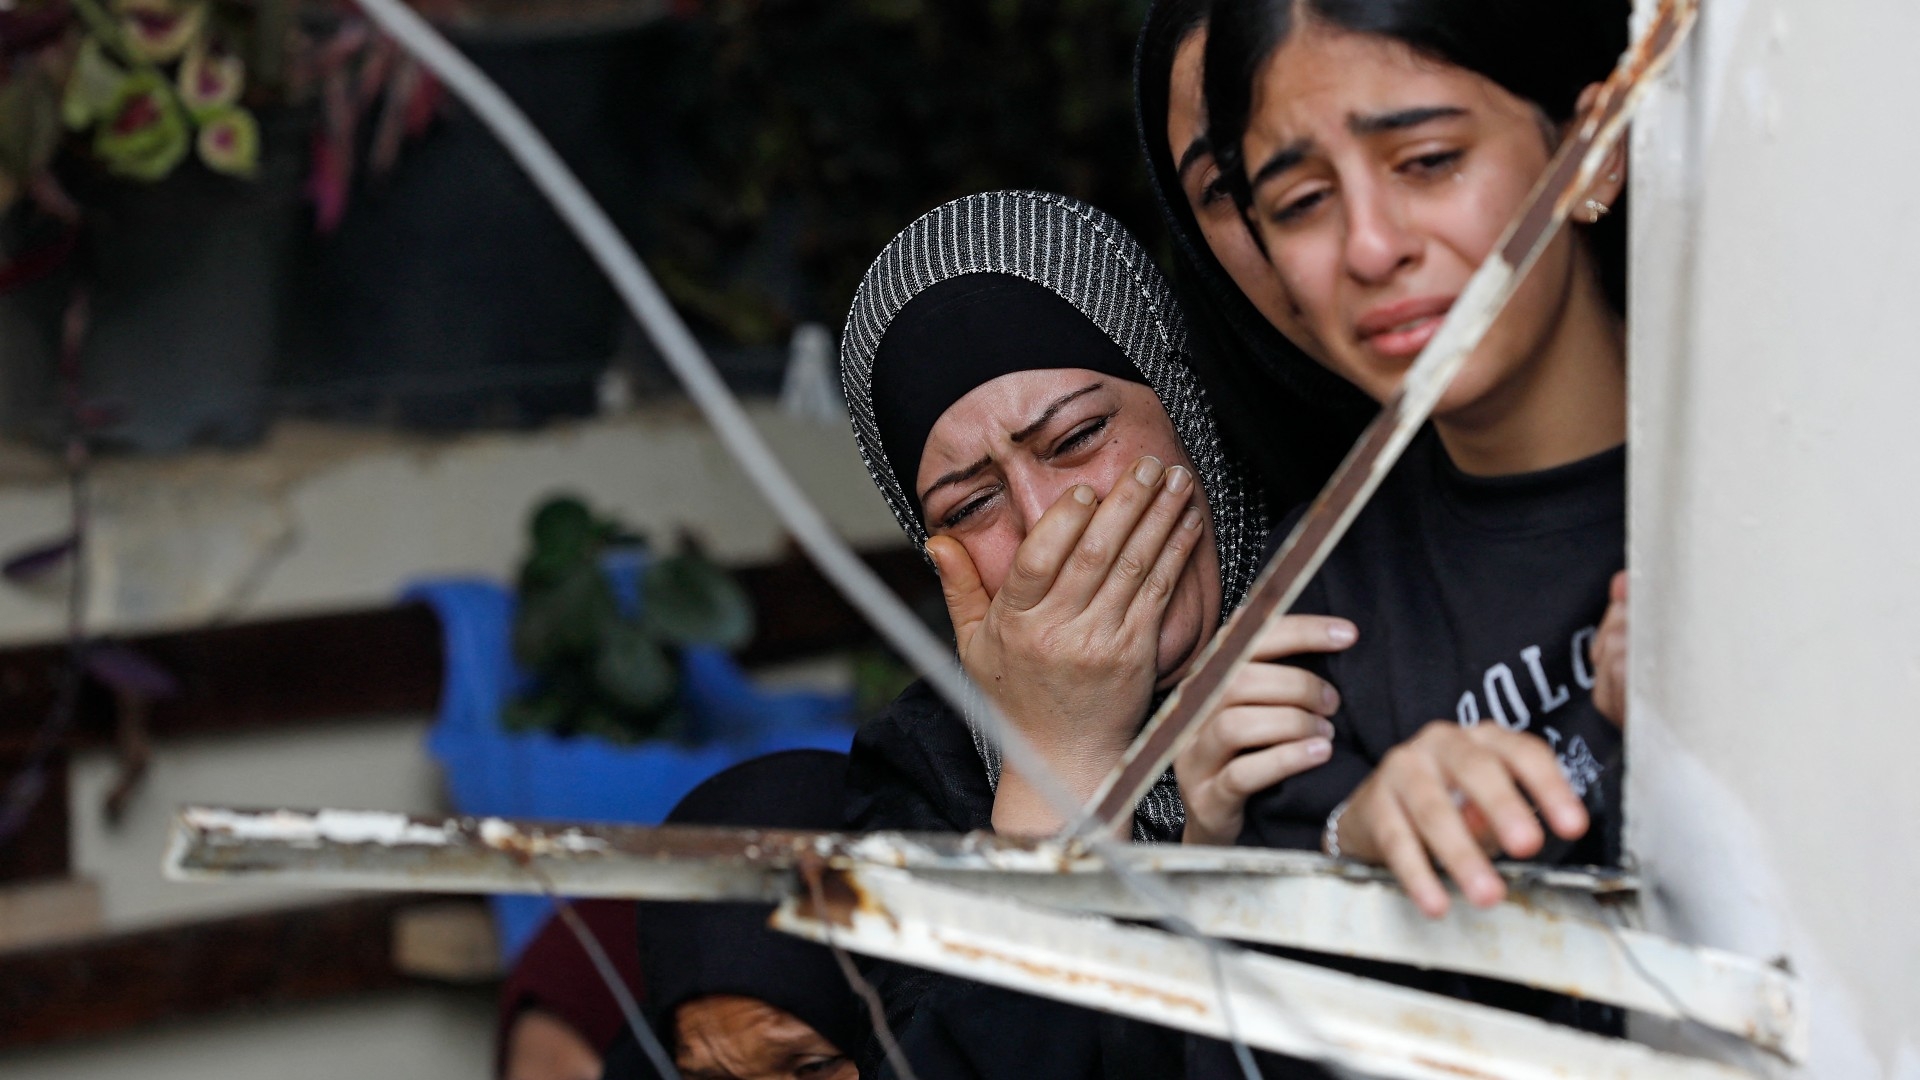 Palestinian relatives cry during a funeral procession in the city of Jenin, in the occupied West Bank on 8 December 2022 (AFP)